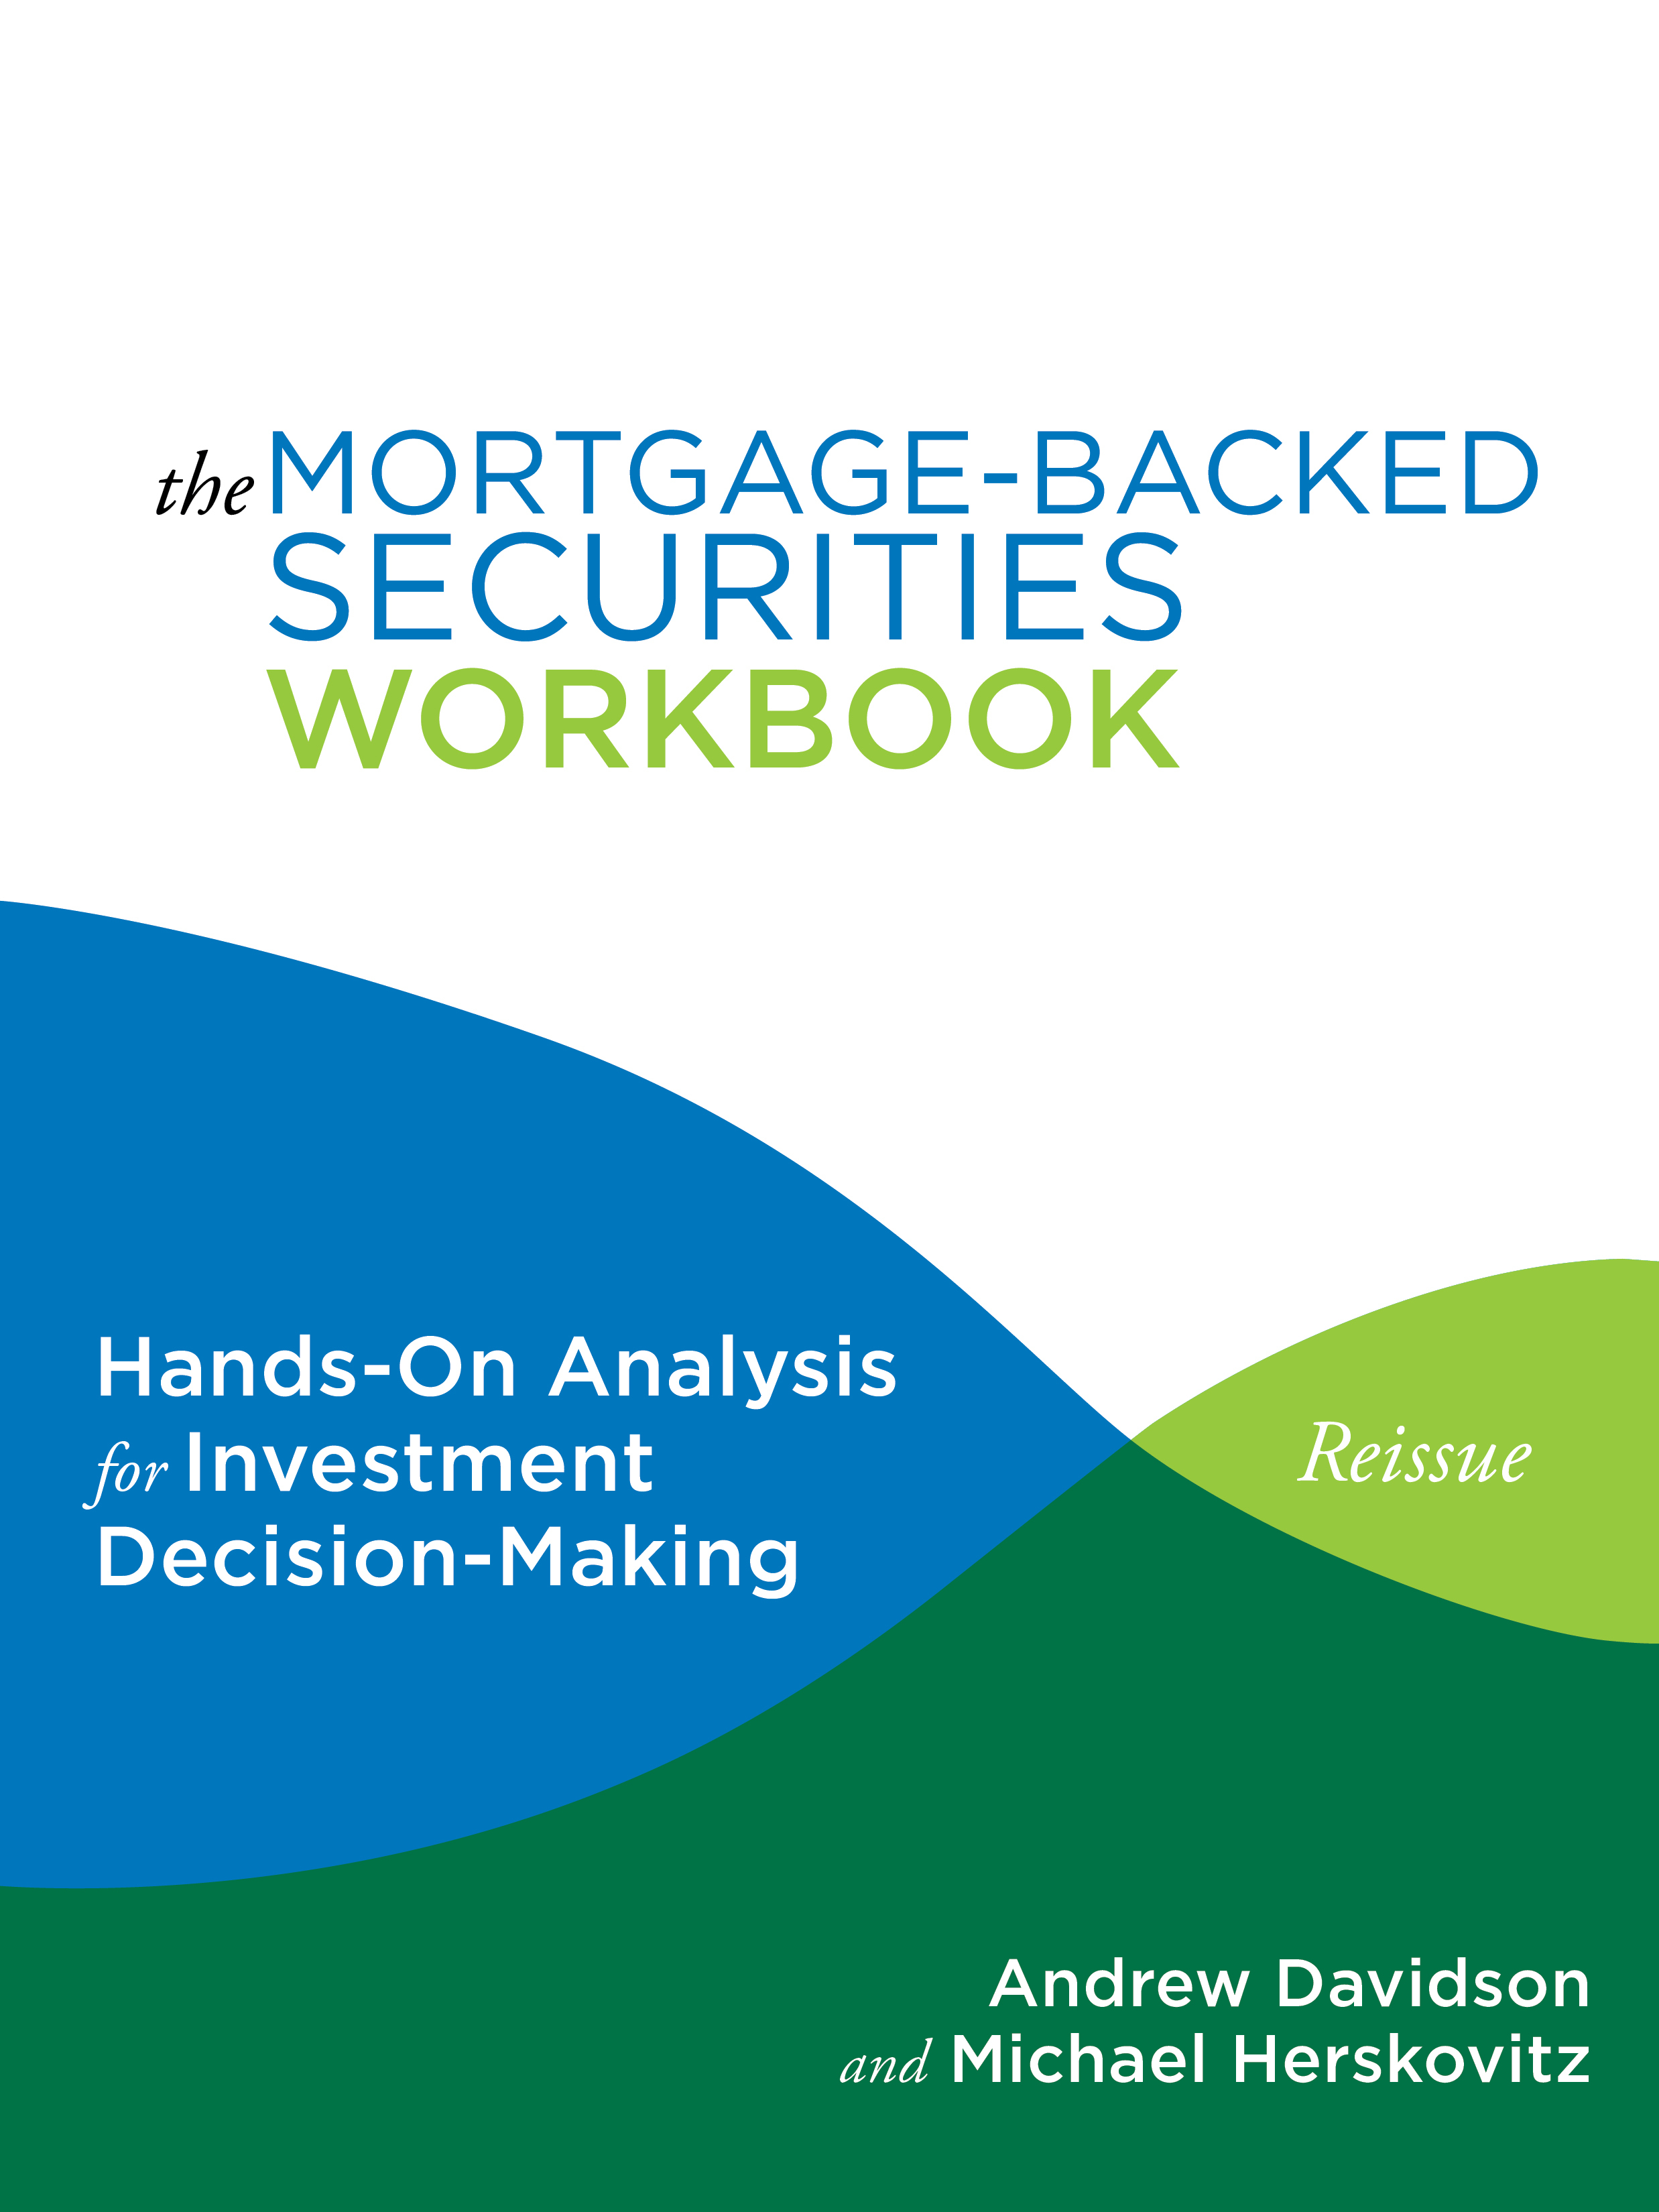 MBS Workbook Reissue Cover